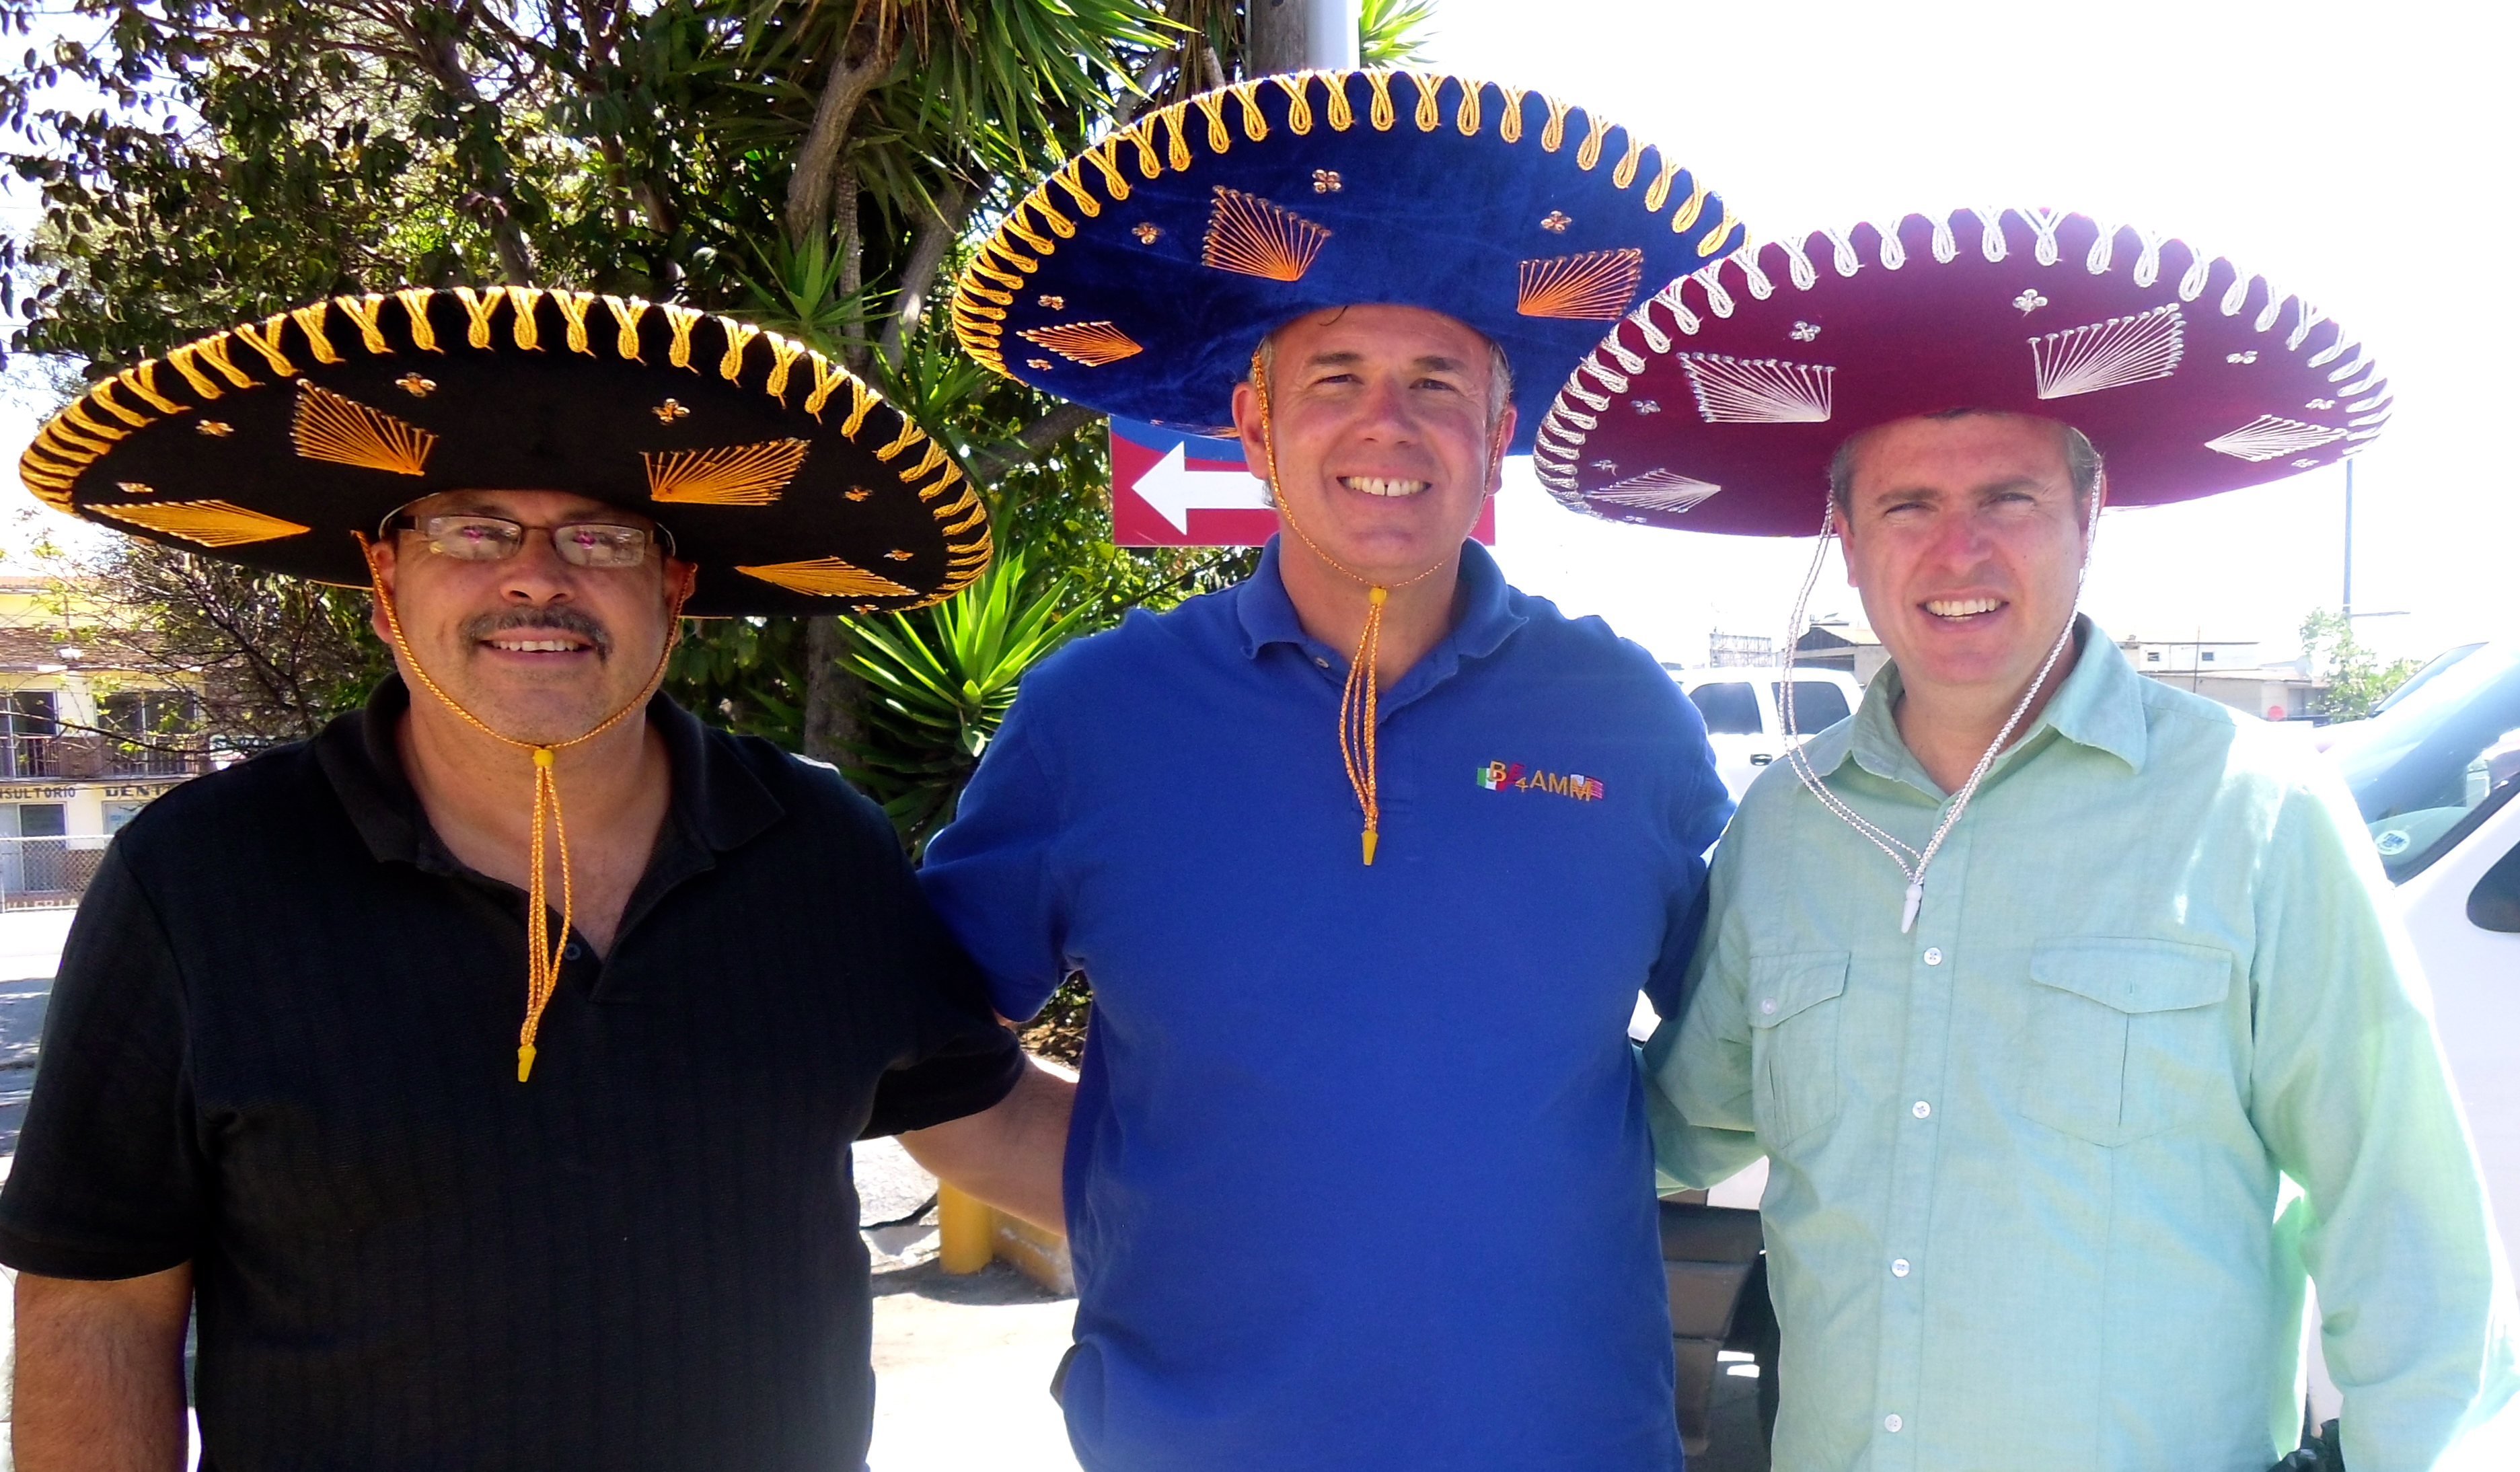 Daniel Nuñez, Ray Call and Dave - The Three Amigos!